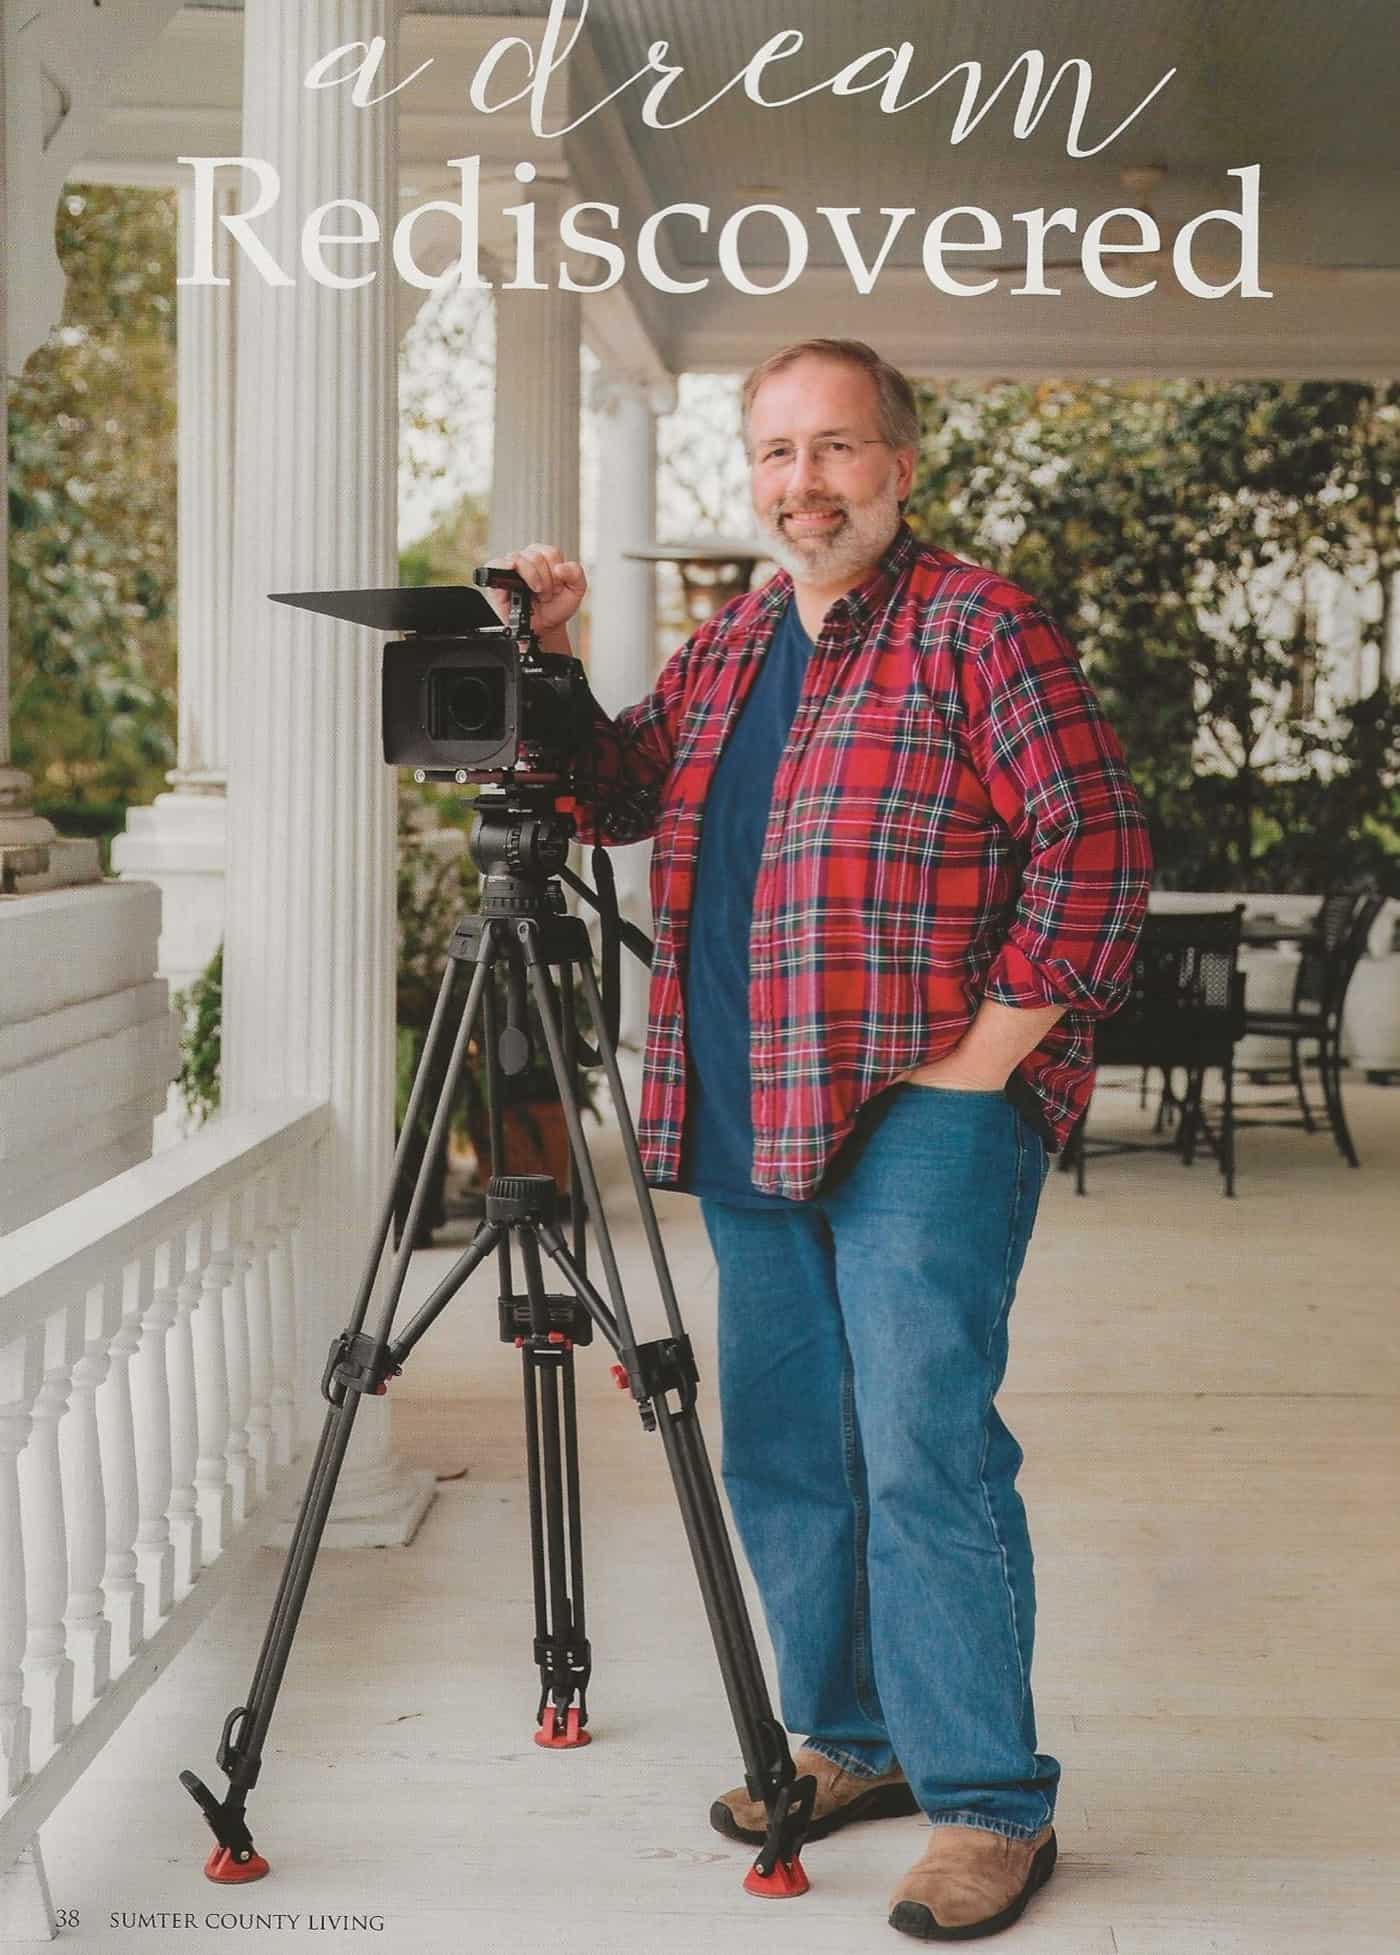 Cover photo from the Sumter County Living magazine feature article about Patrick Peacock written by Rachel Price and photographed from David Parks Photography.